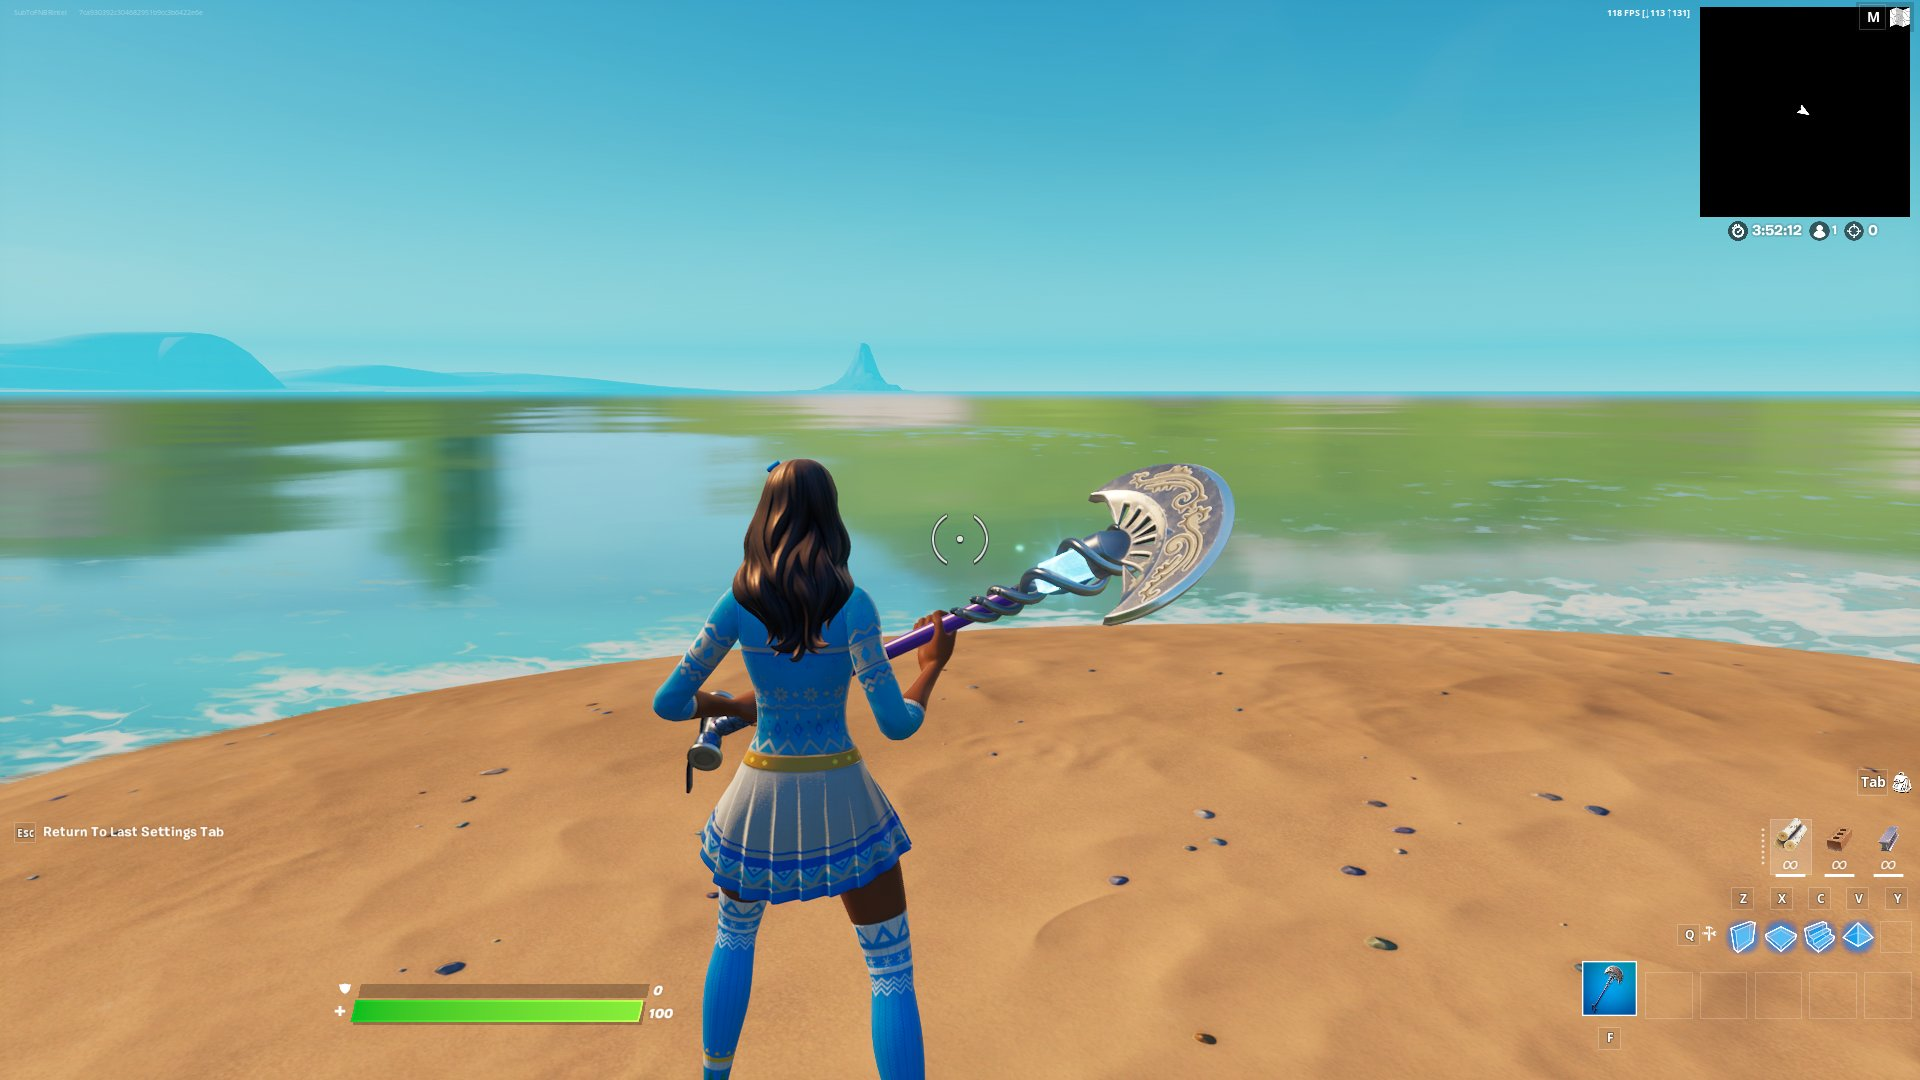 XP Glitch gives players hundreds of Levels, causes Creative Hub to break